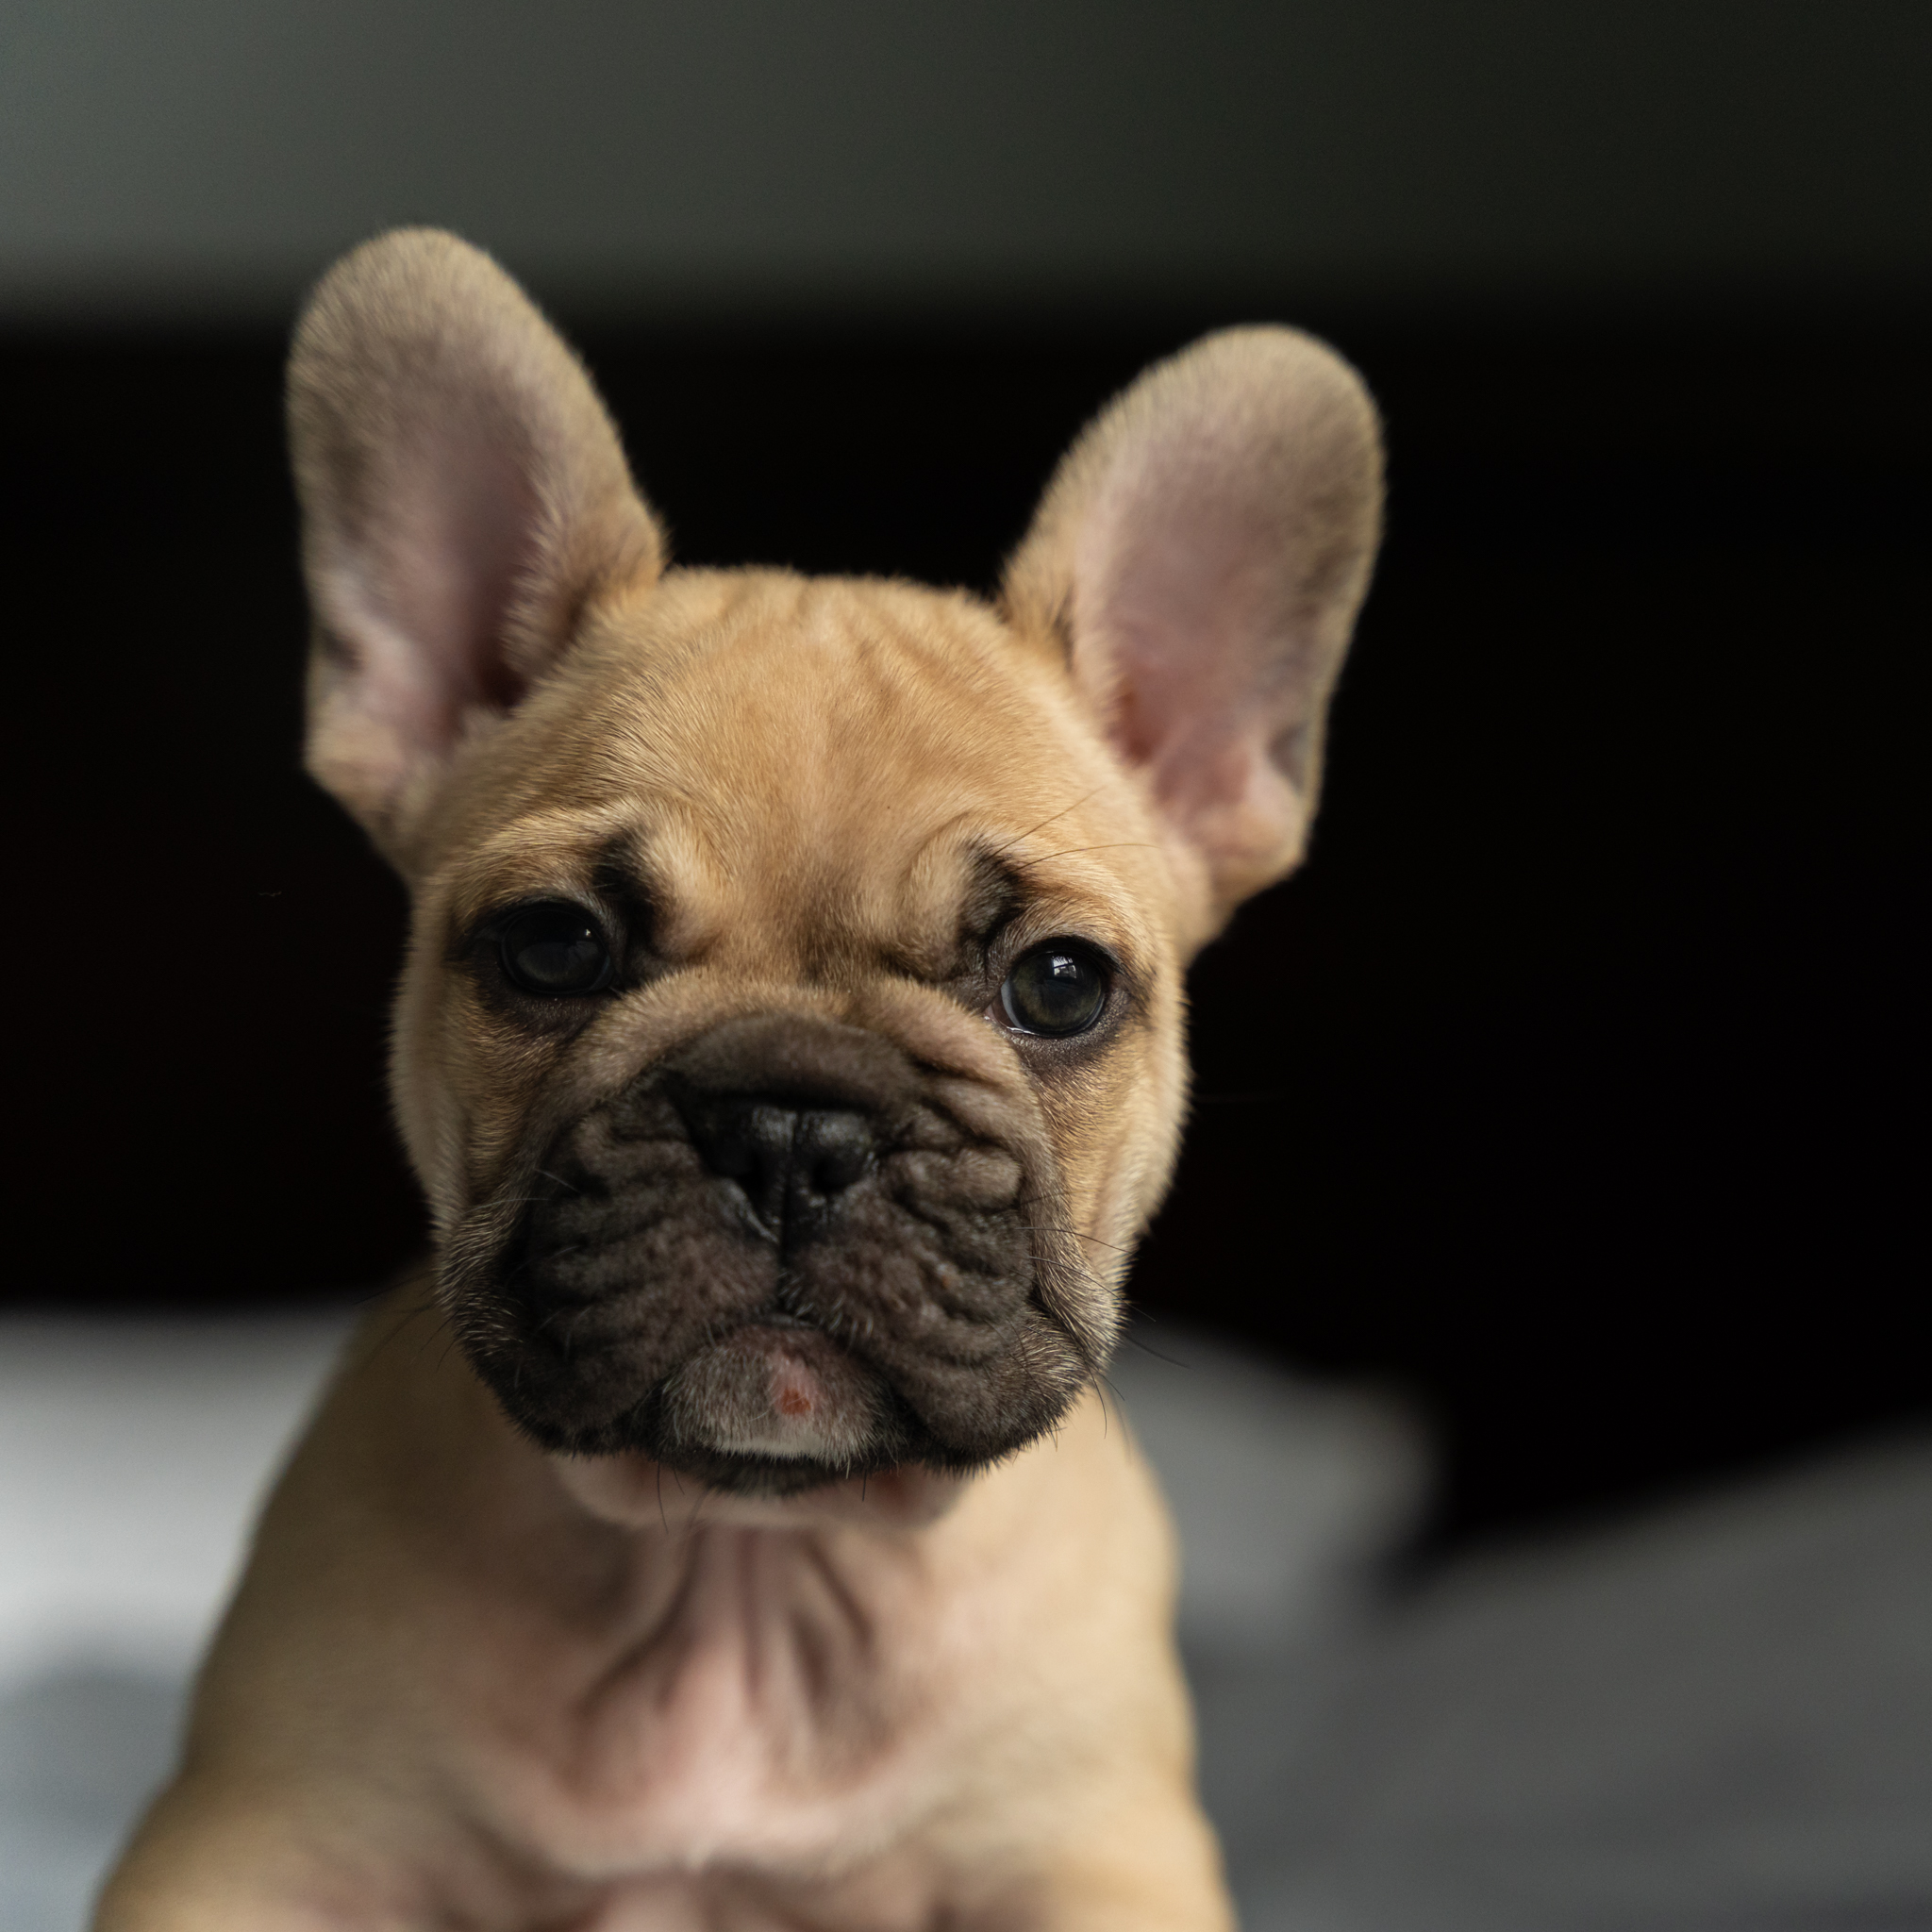 Fawn French Bulldog with black mask sitting on the bed with a dark background.